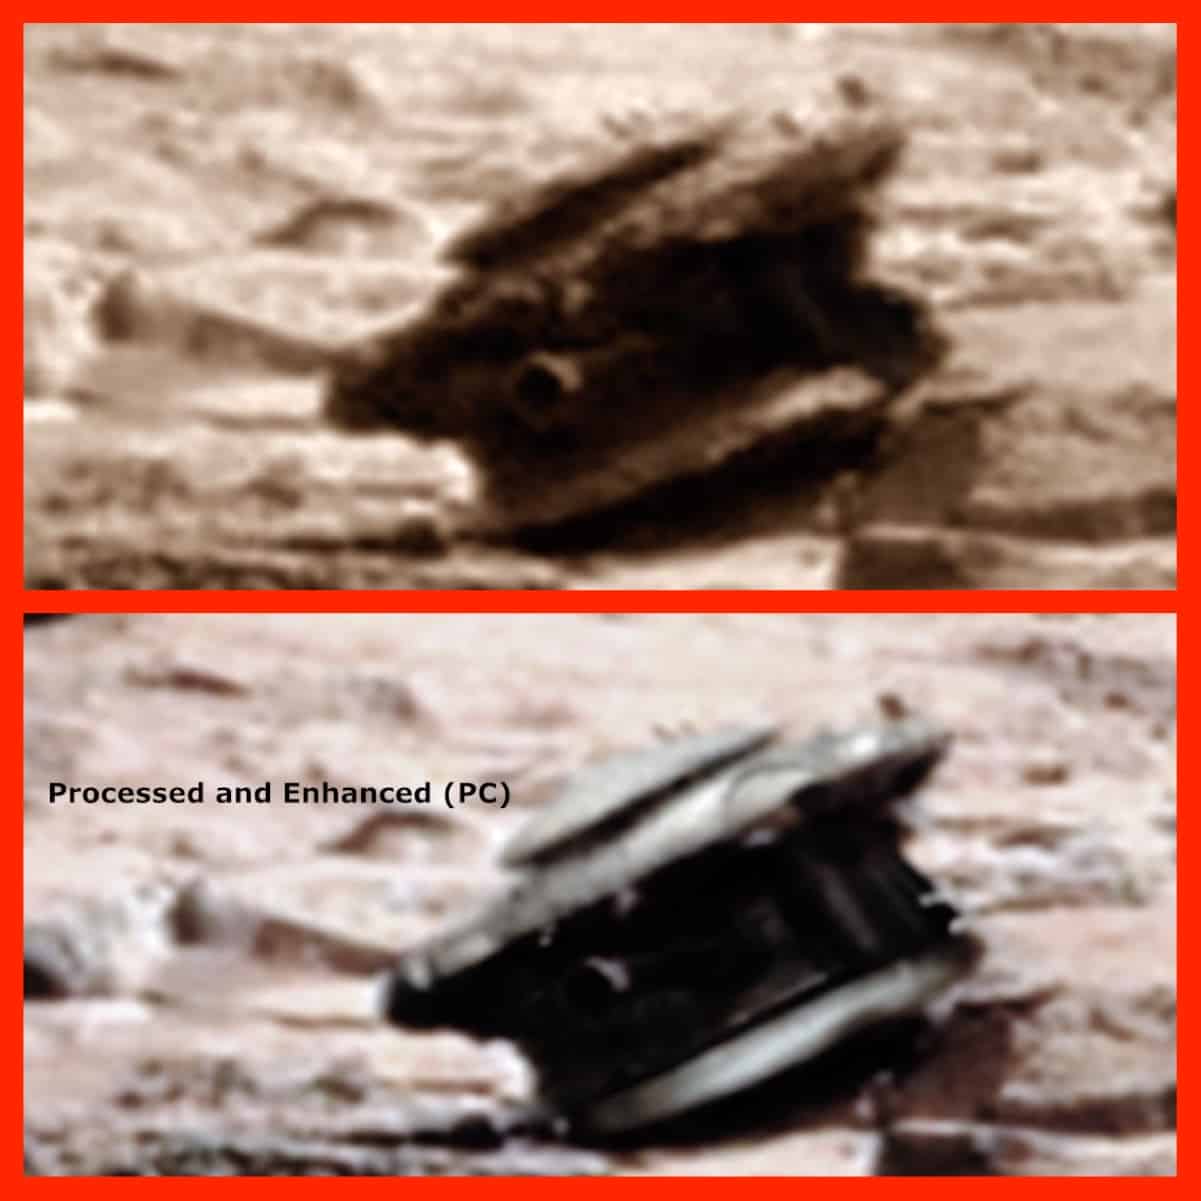 Alien Drone on Mars, Ancient Code, Space, NASA